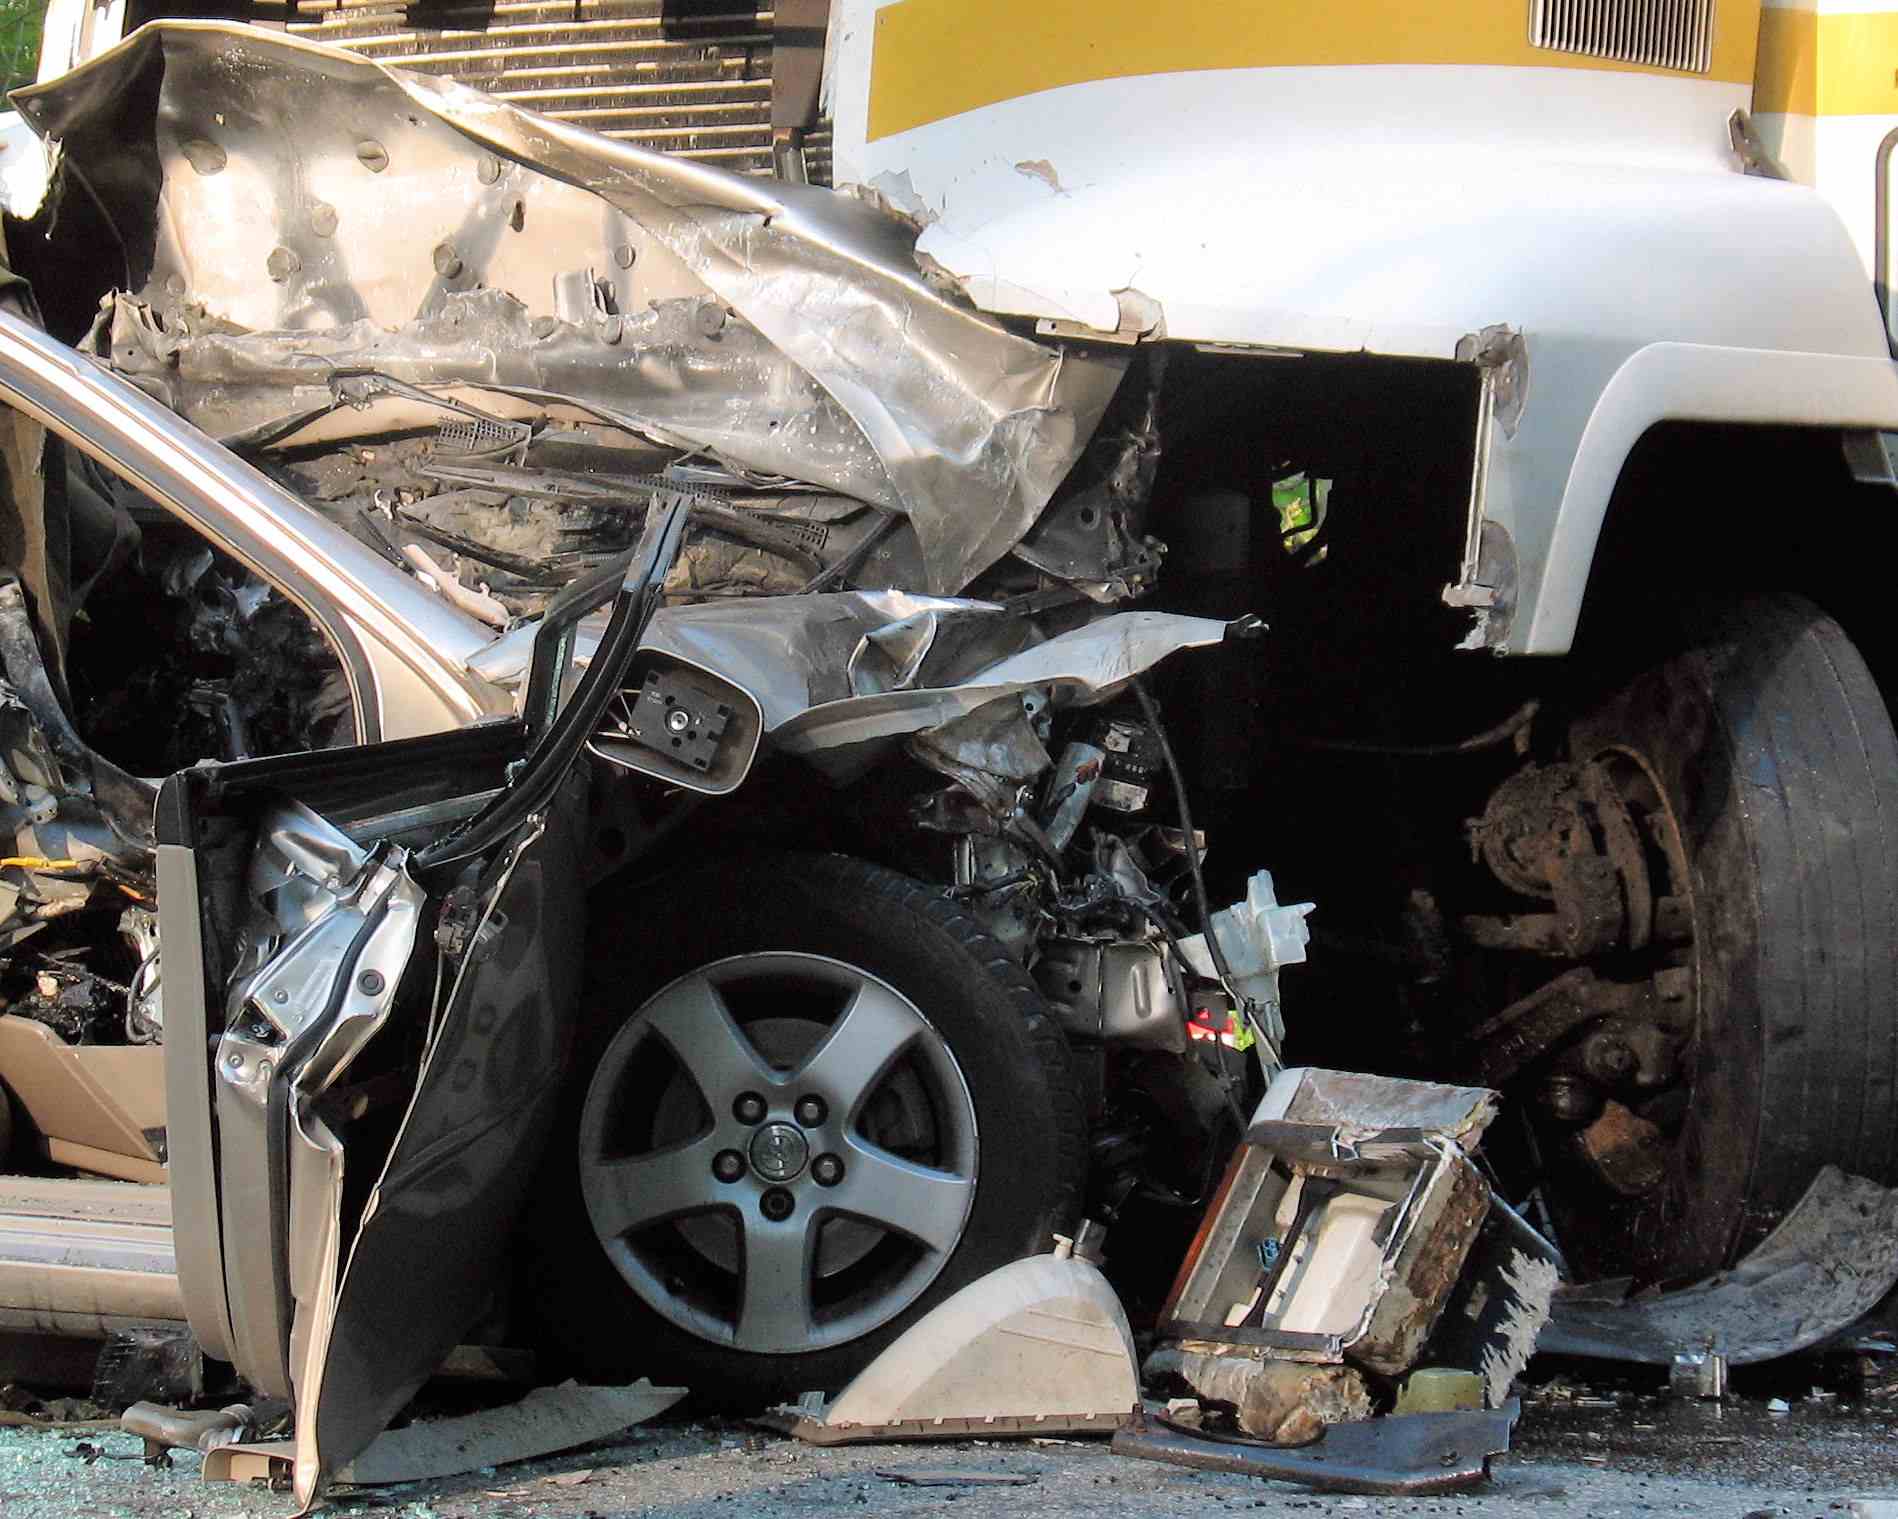 Determining fault after a car accident may be more complicated than looking at which vehicle hit the other.